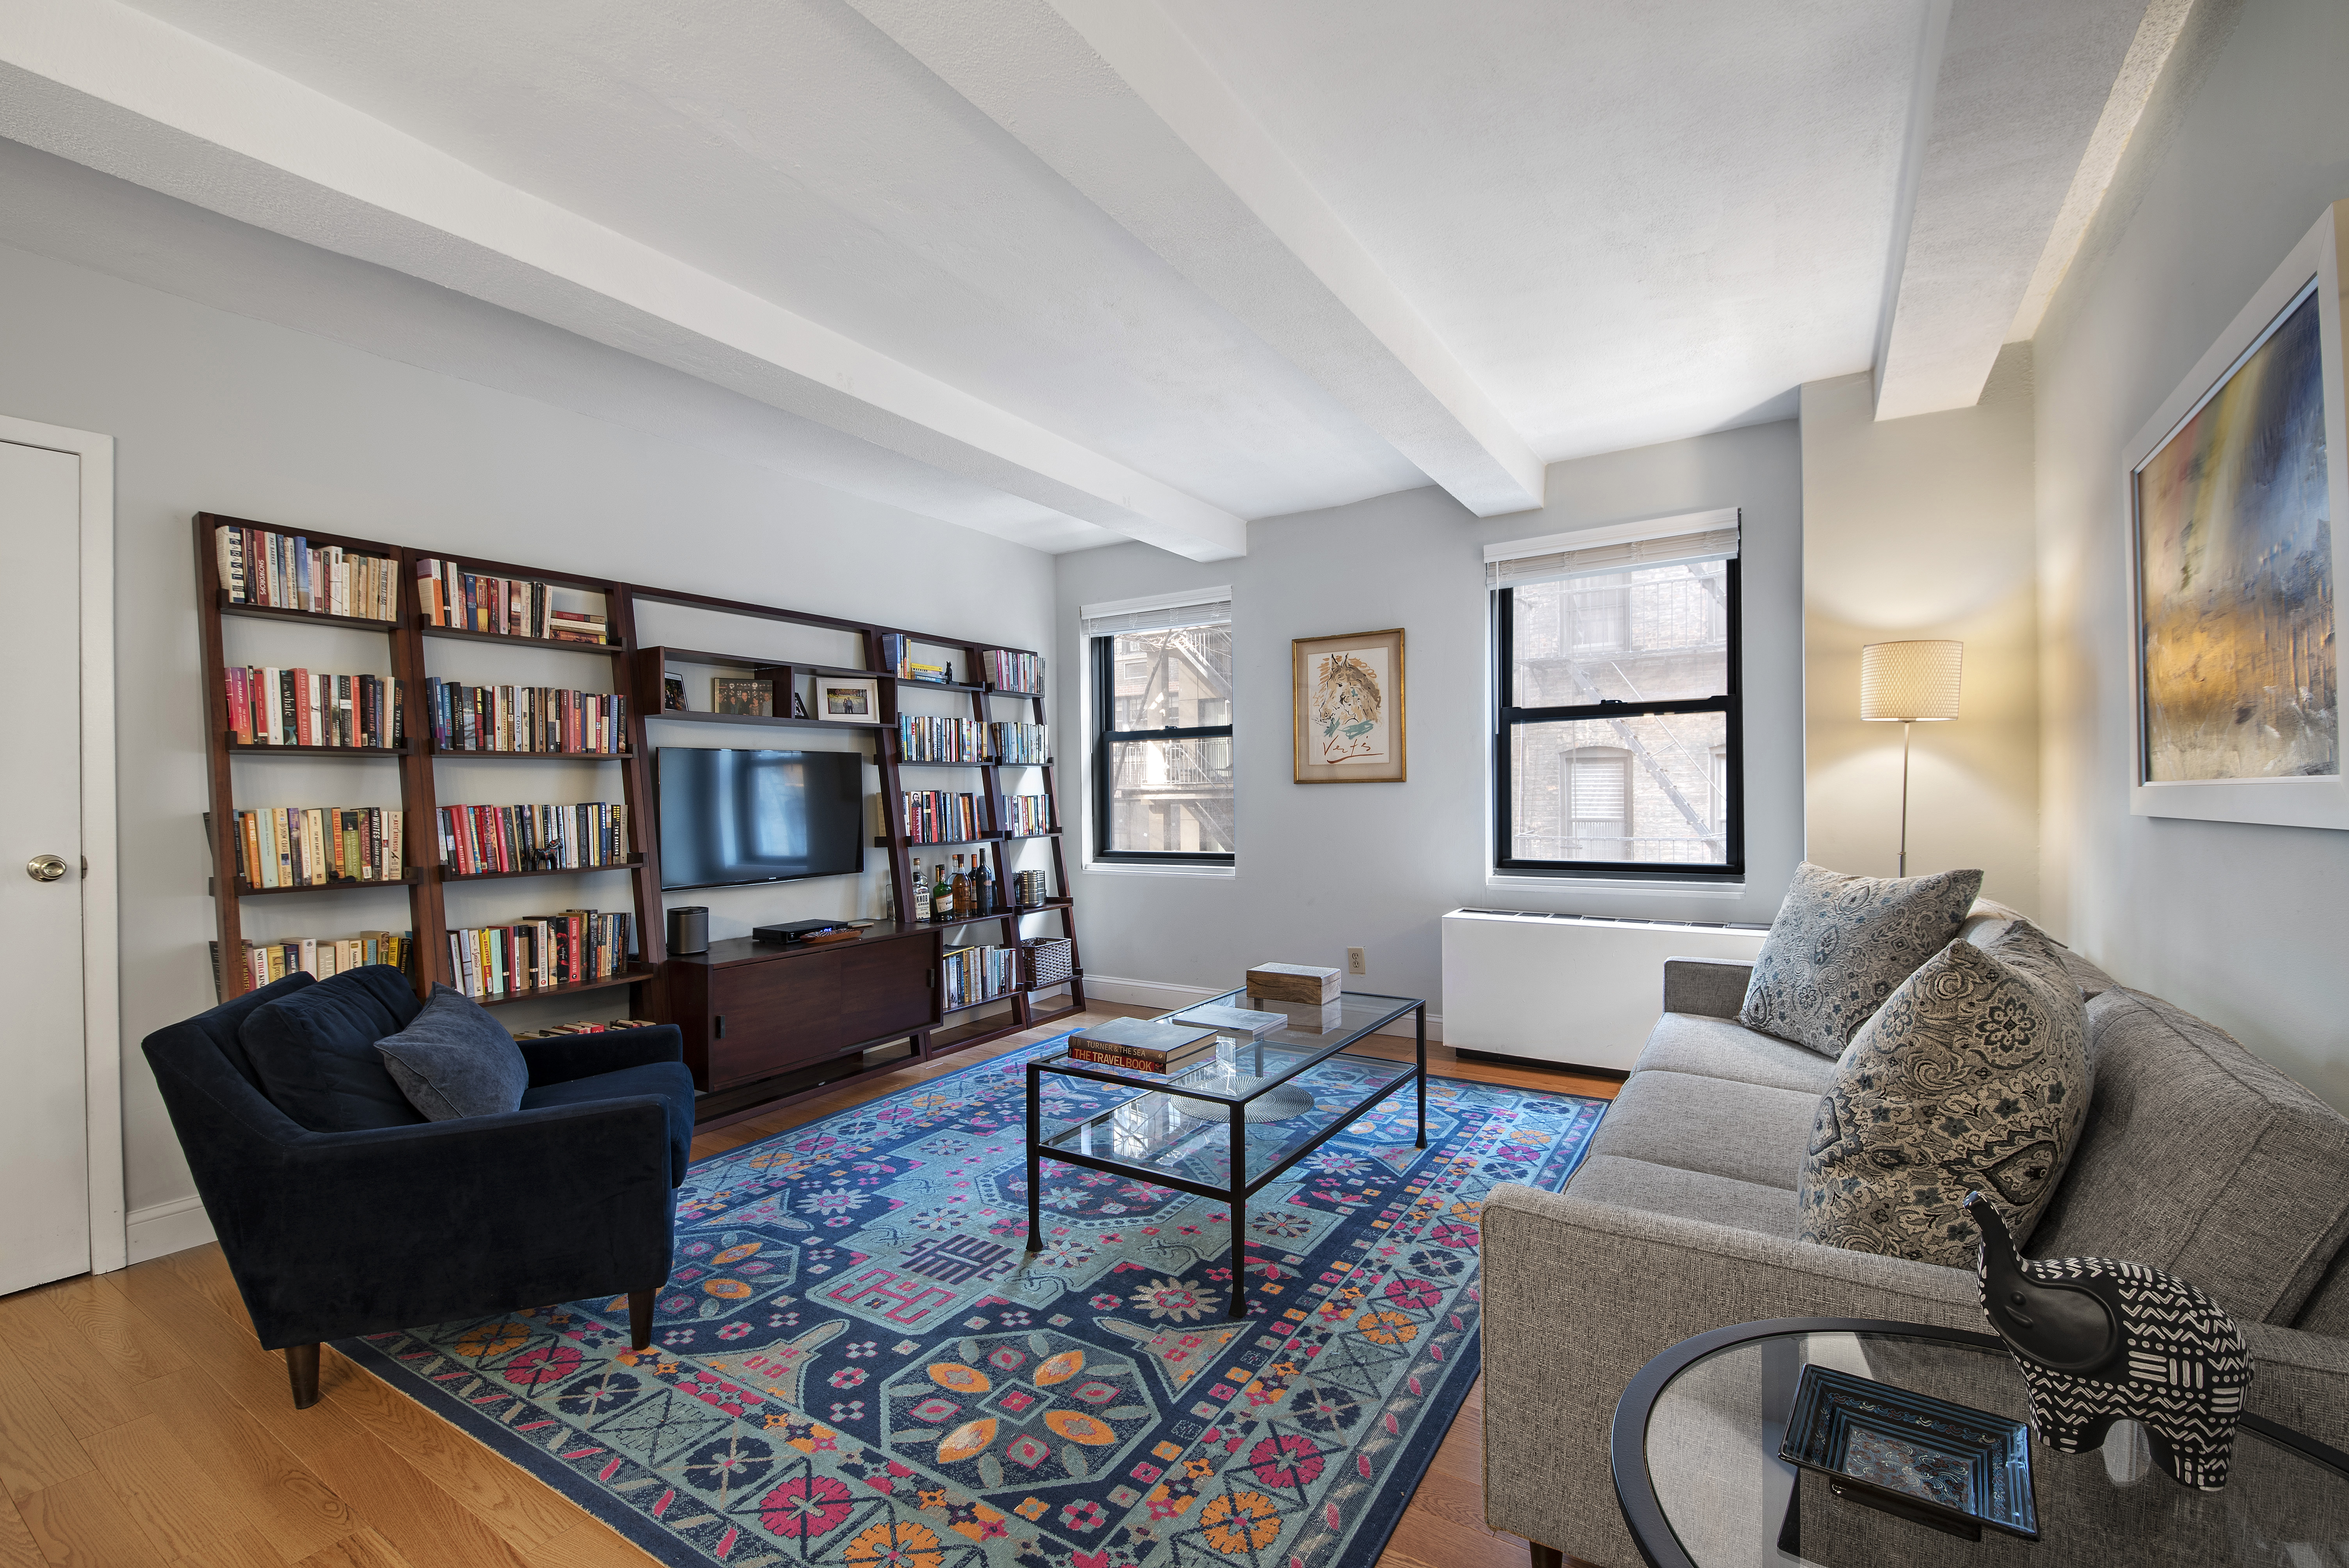 A living area with hardwood floors, beamed ceilings, several bookshelves, and a colorful rug.